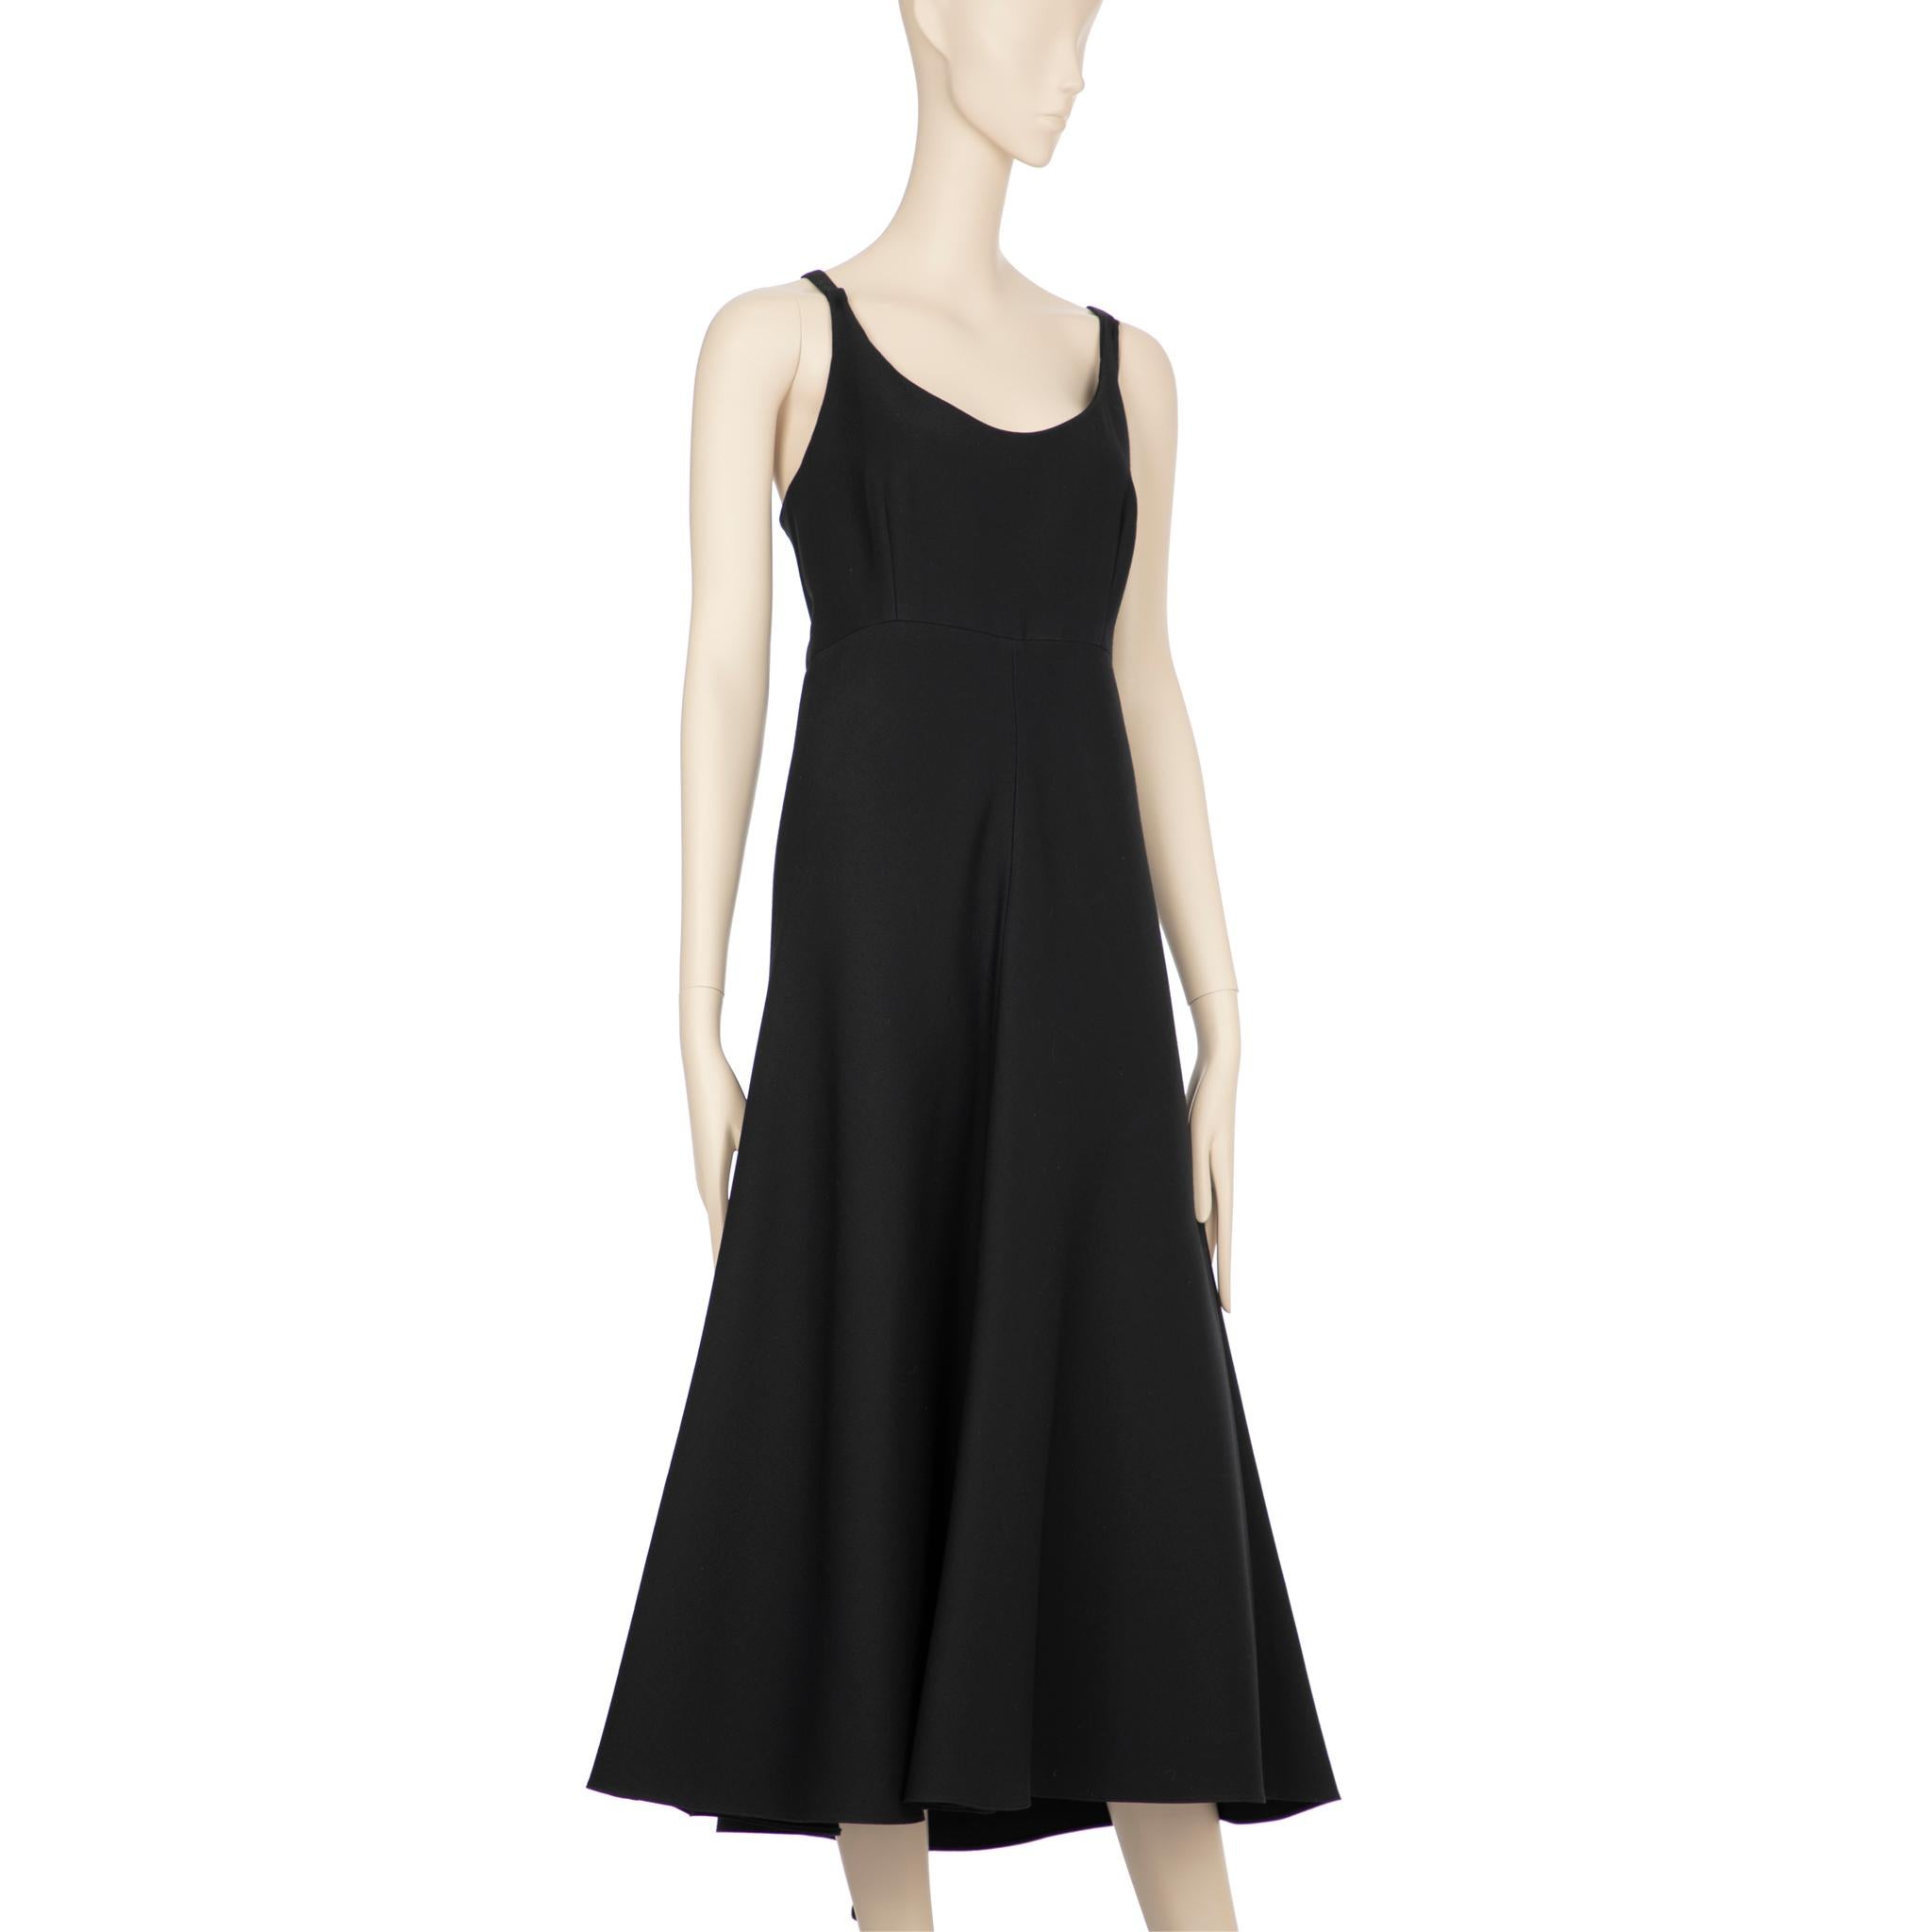 Christian Dior Black Fitted Dress 40 FR In Excellent Condition For Sale In DOUBLE BAY, NSW